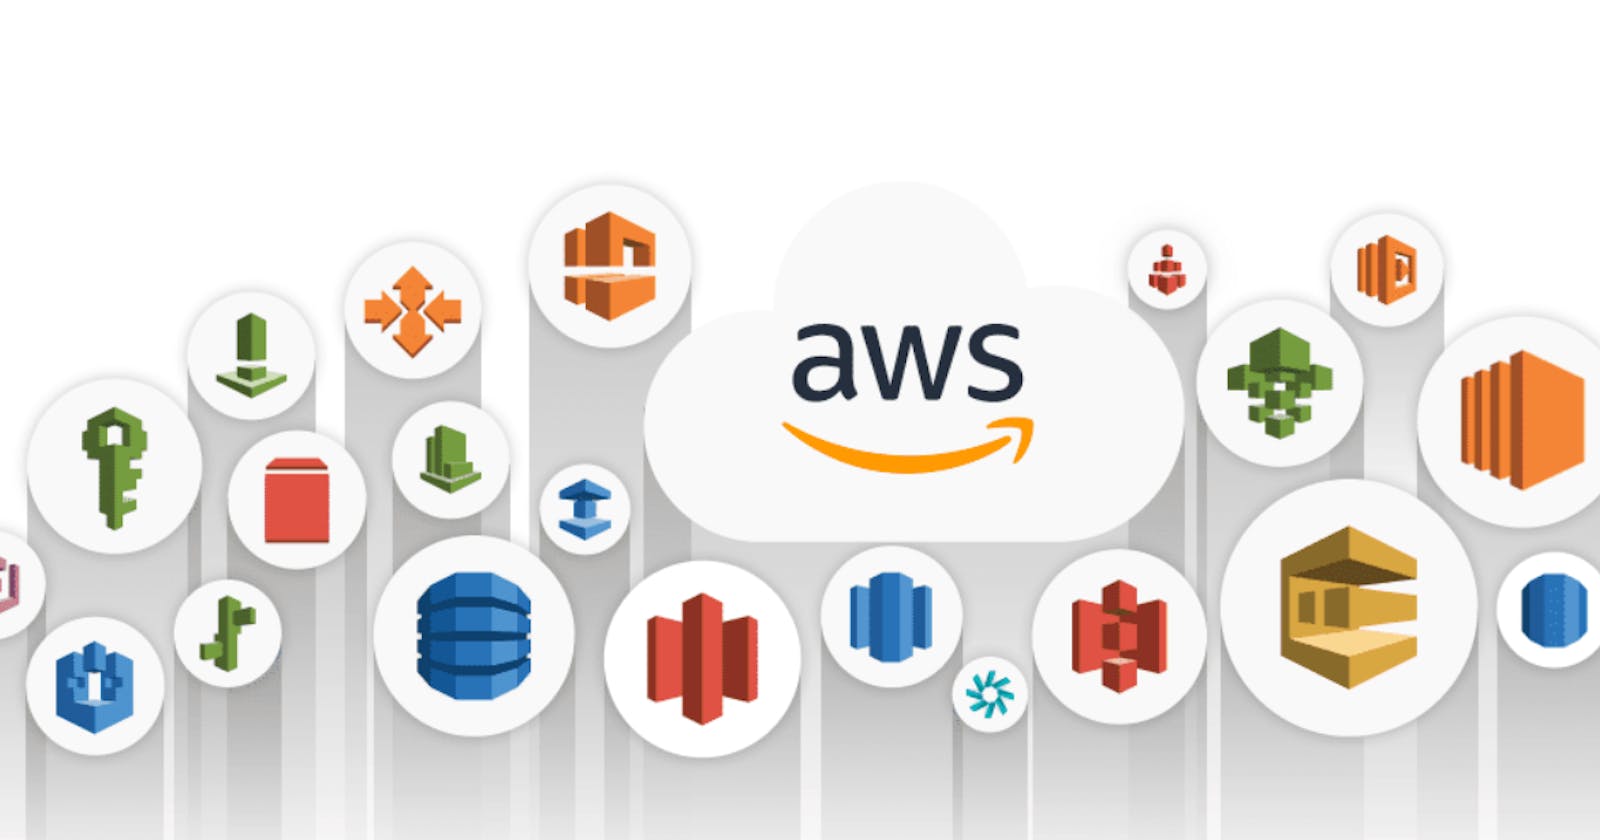 Why do we need AWS and what all services resides under AWS